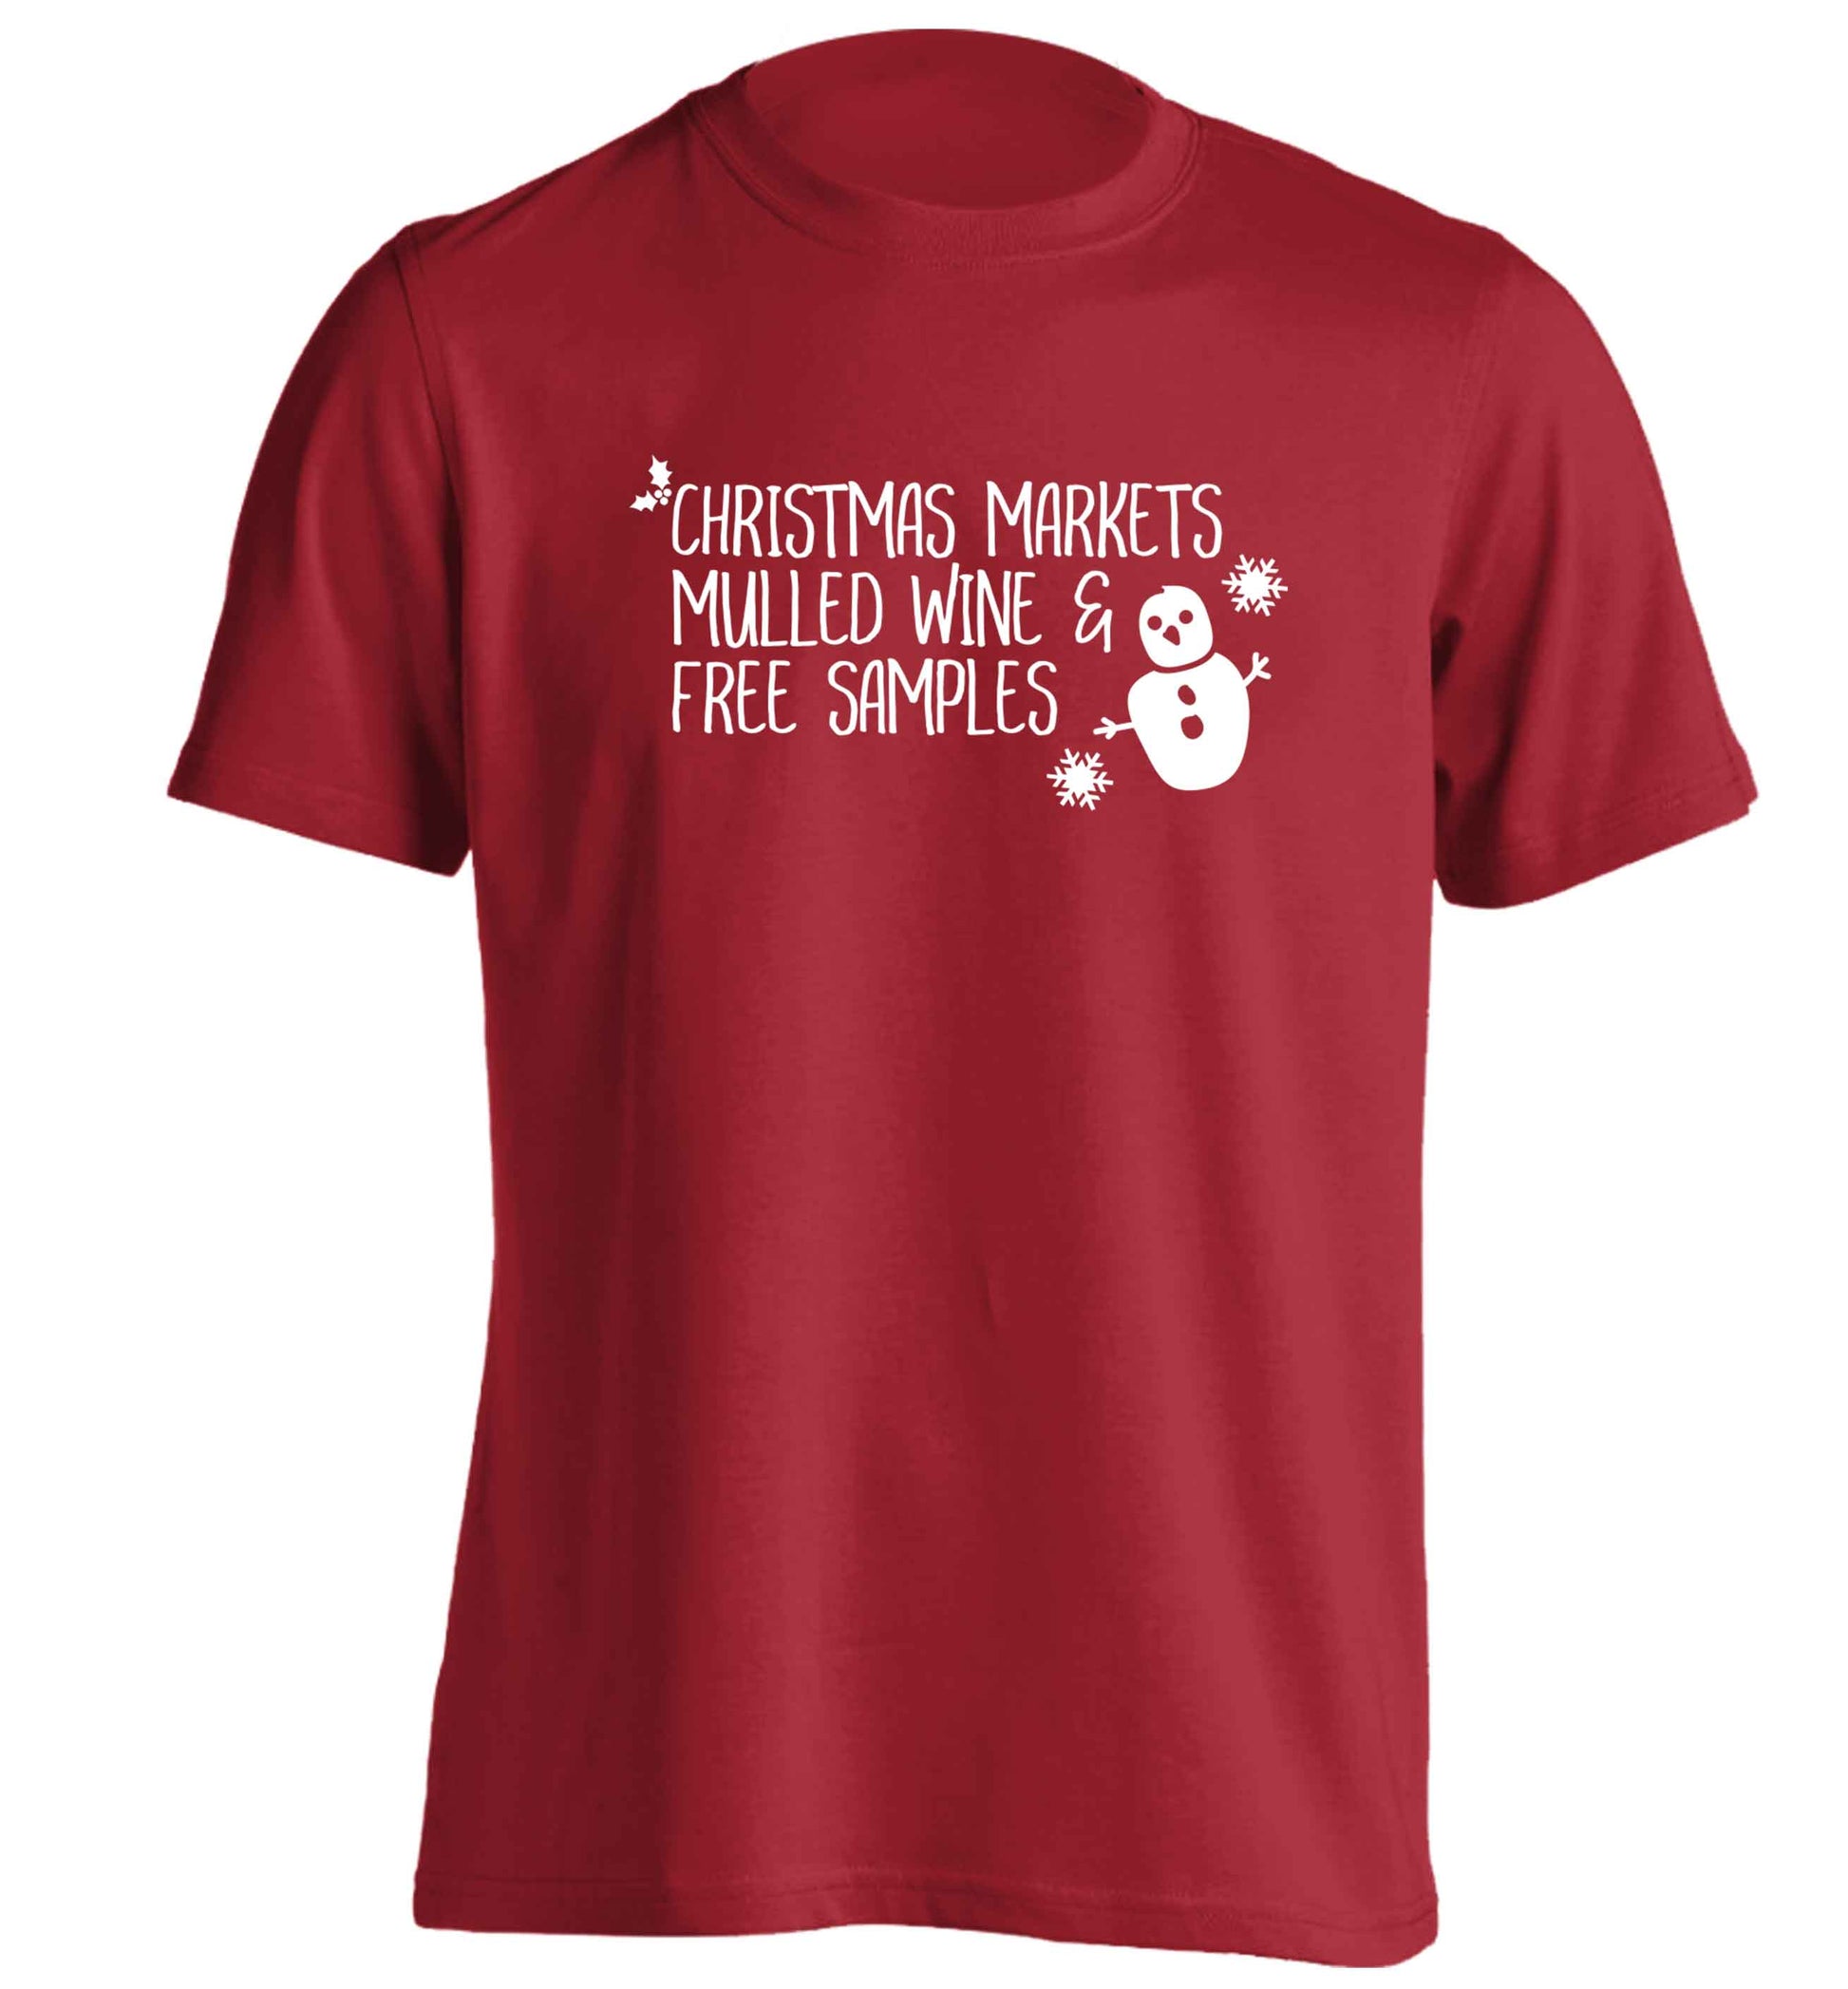 Christmas market mulled wine & free samples adults unisex red Tshirt 2XL